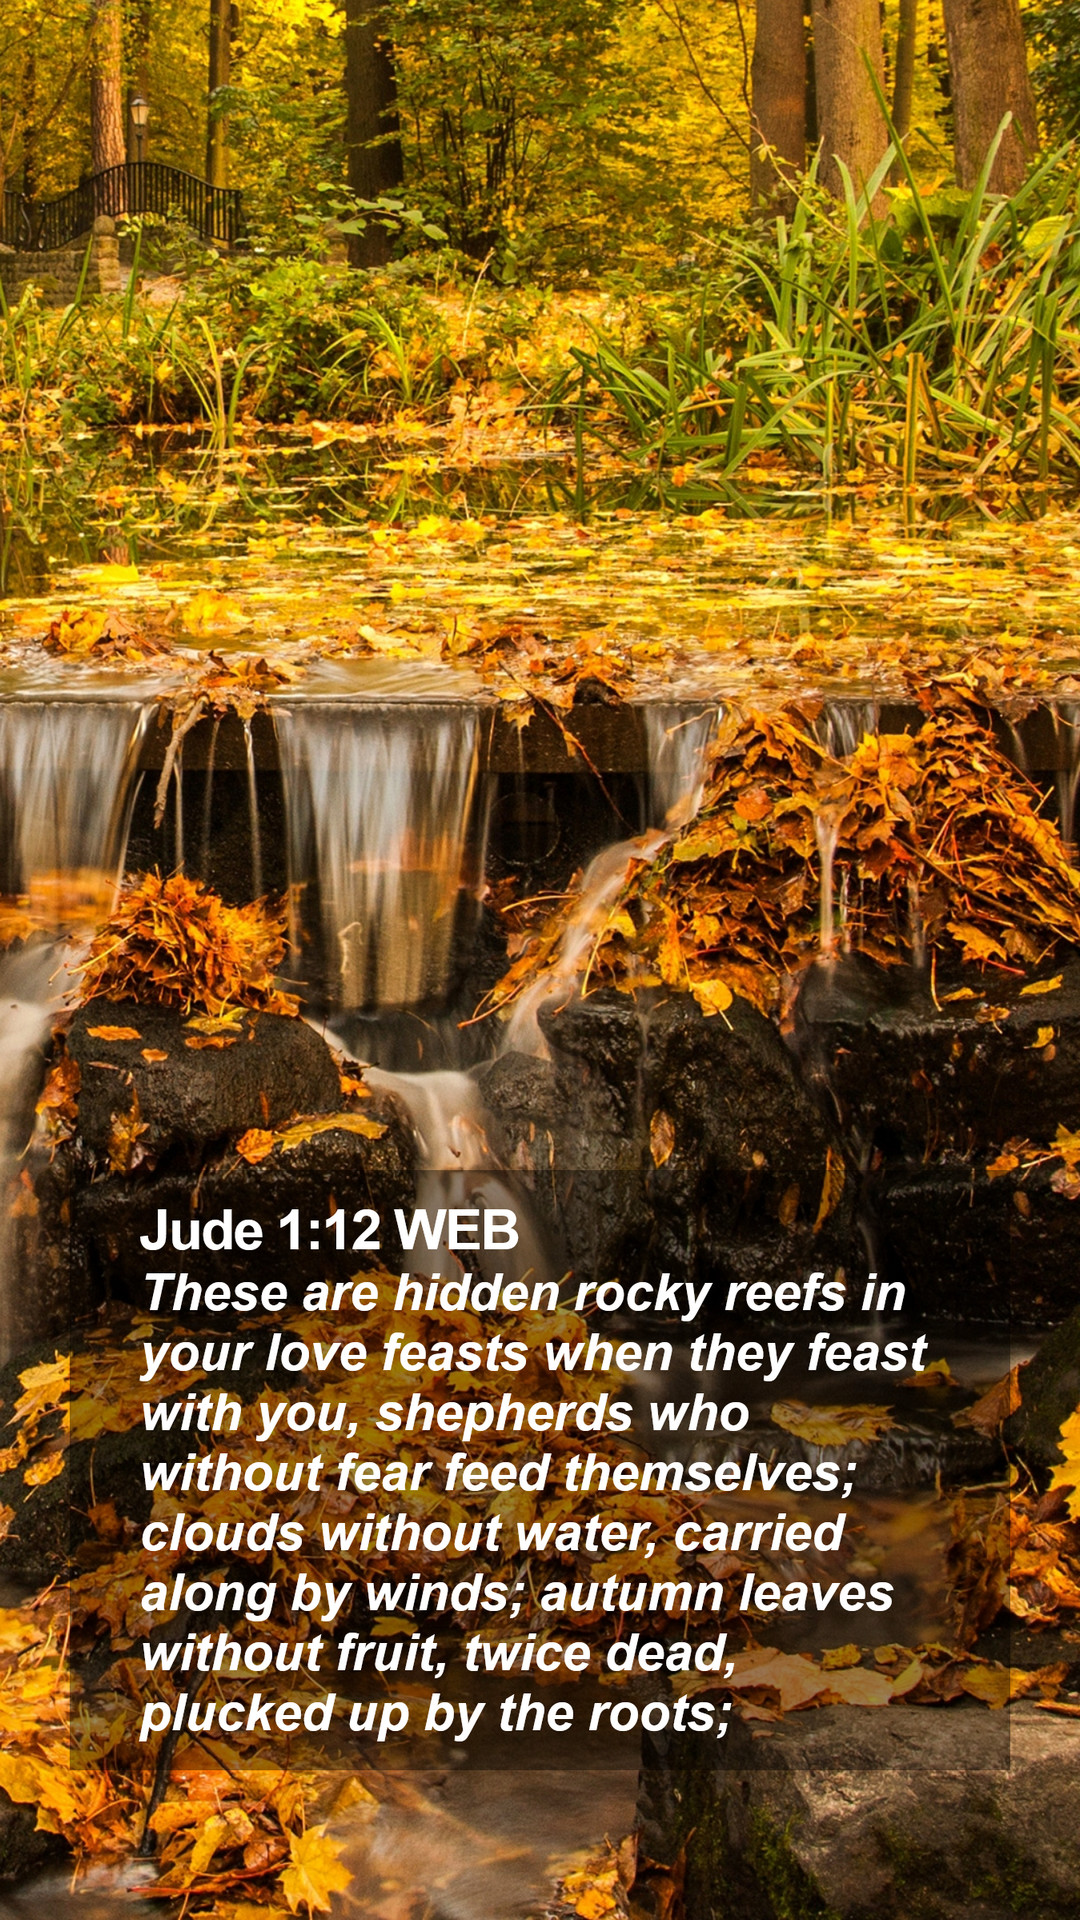 Jude 1:12 WEB Mobile Phone Wallpaper are hidden rocky reefs in your love feasts